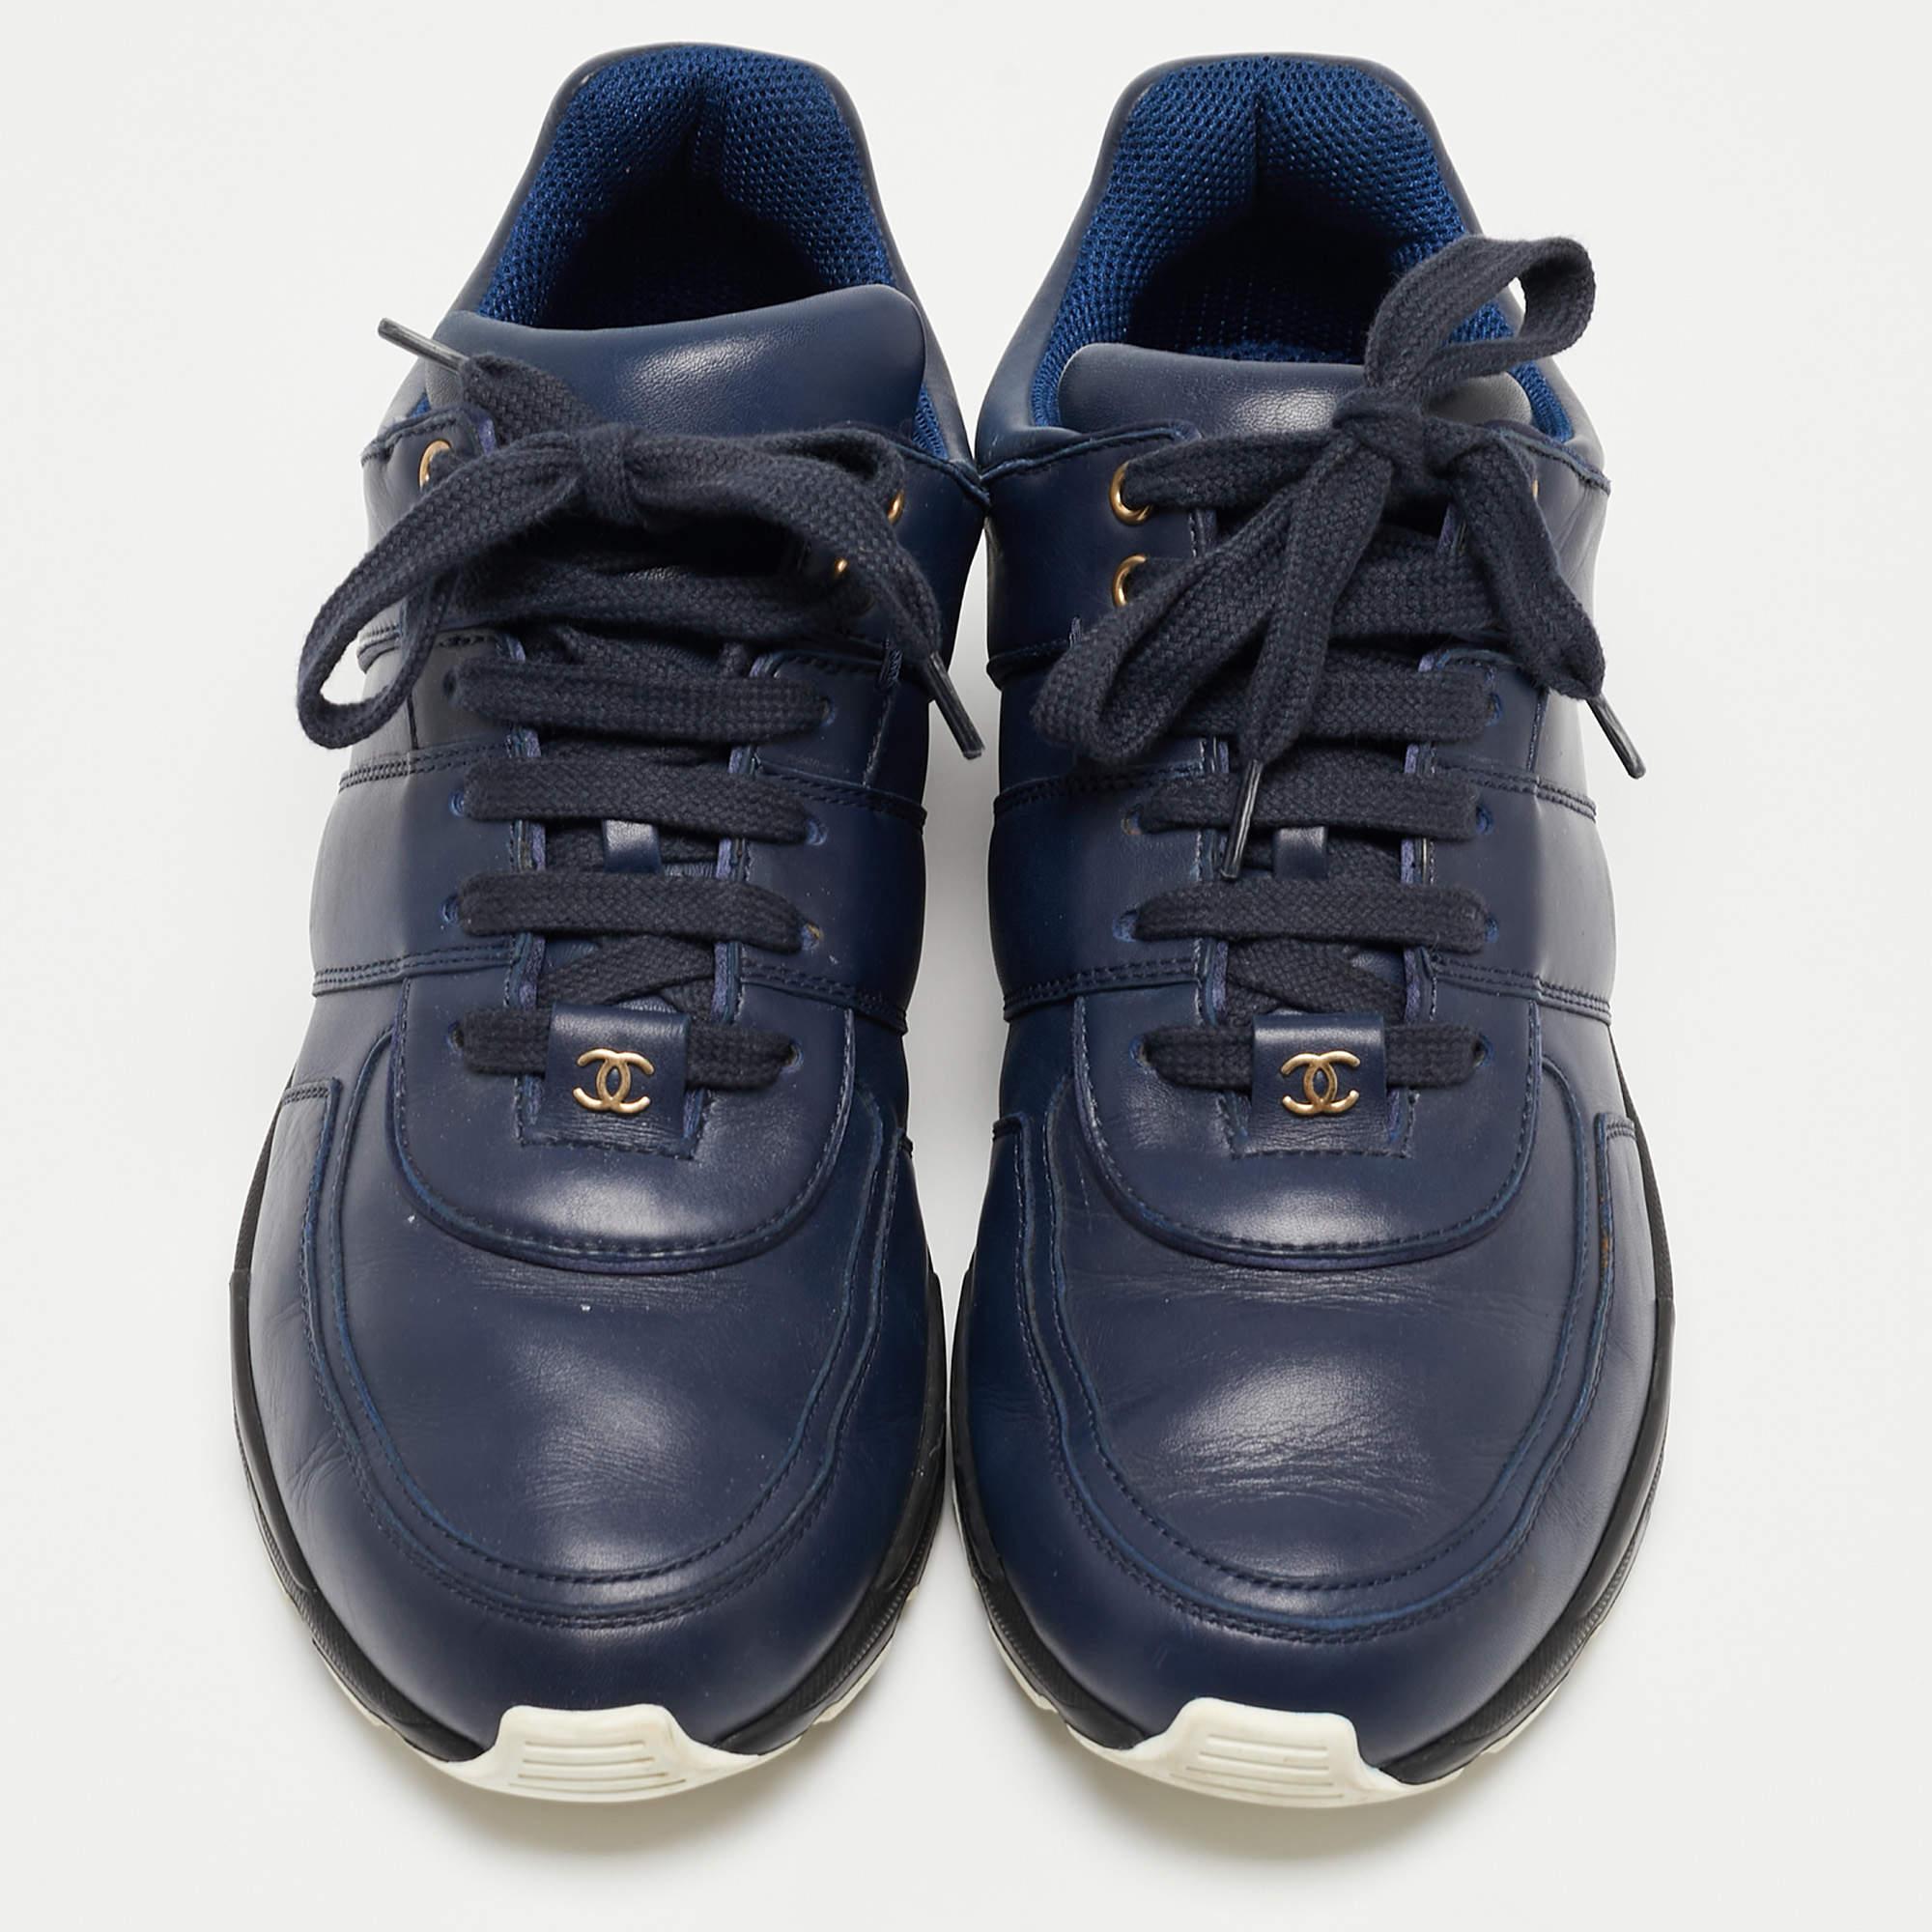 Chanel Navy Blue Leather and Satin CC Low Top Sneakers Size 40.5 In Good Condition For Sale In Dubai, Al Qouz 2